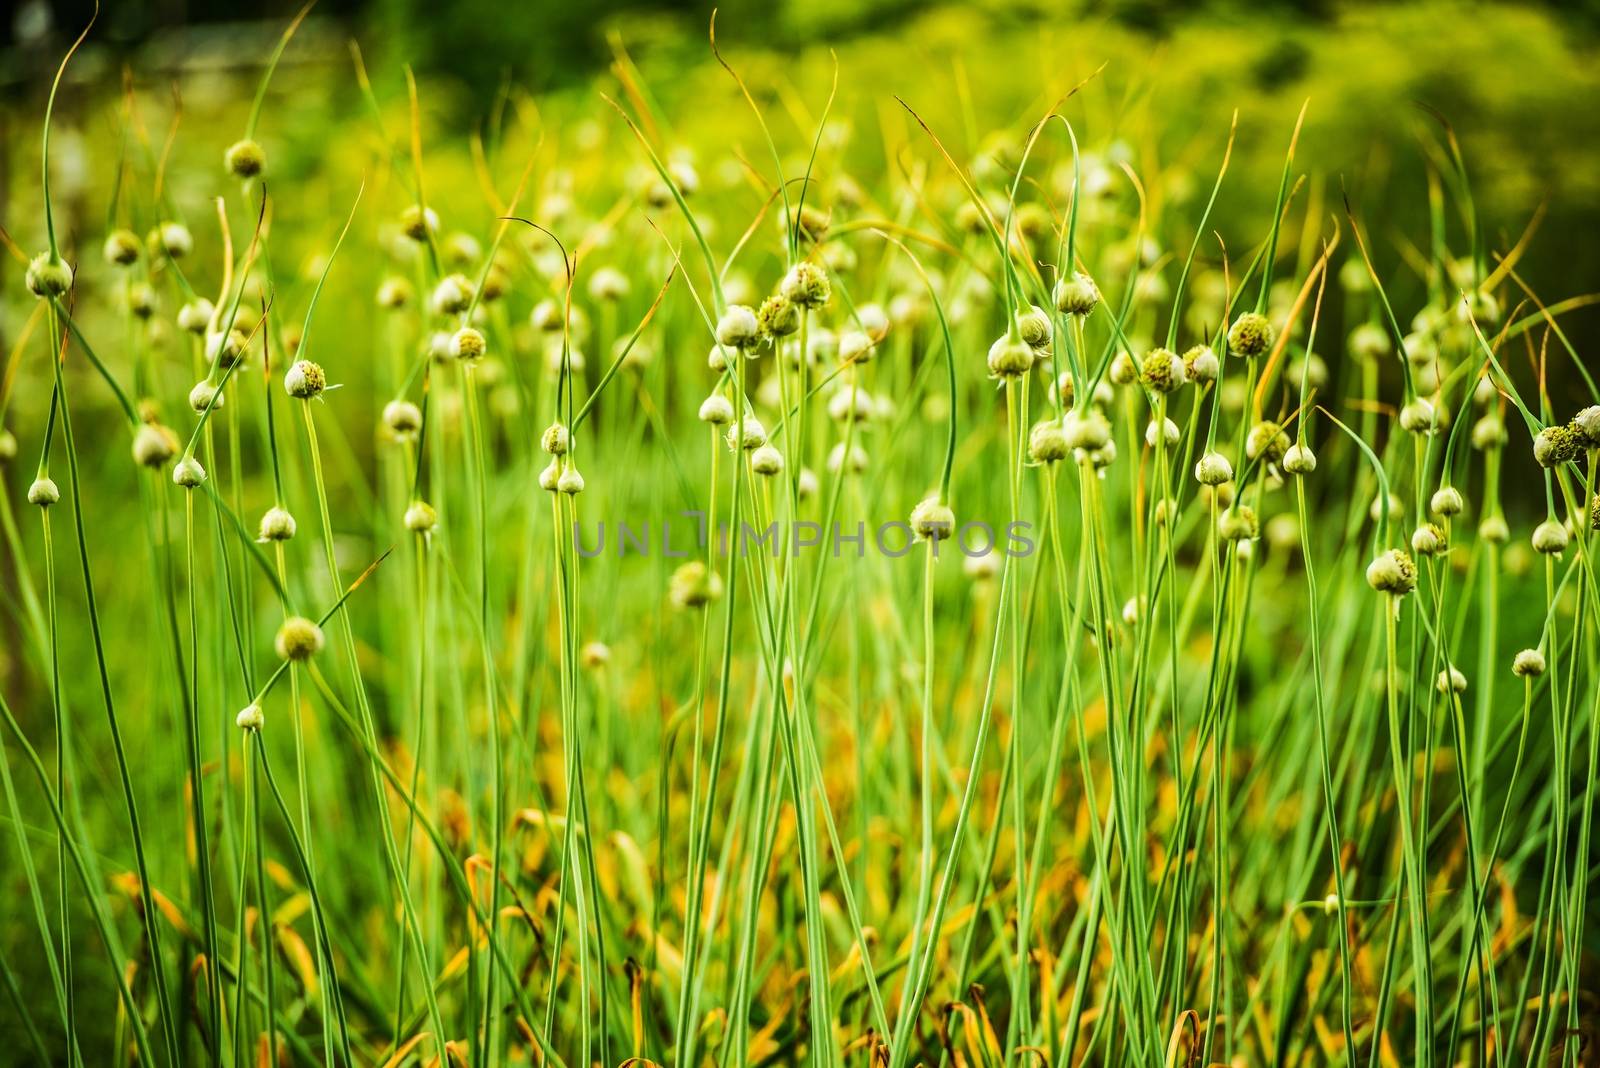 Flowering Chives Closeup Photo. Organic Chive Cultivation.